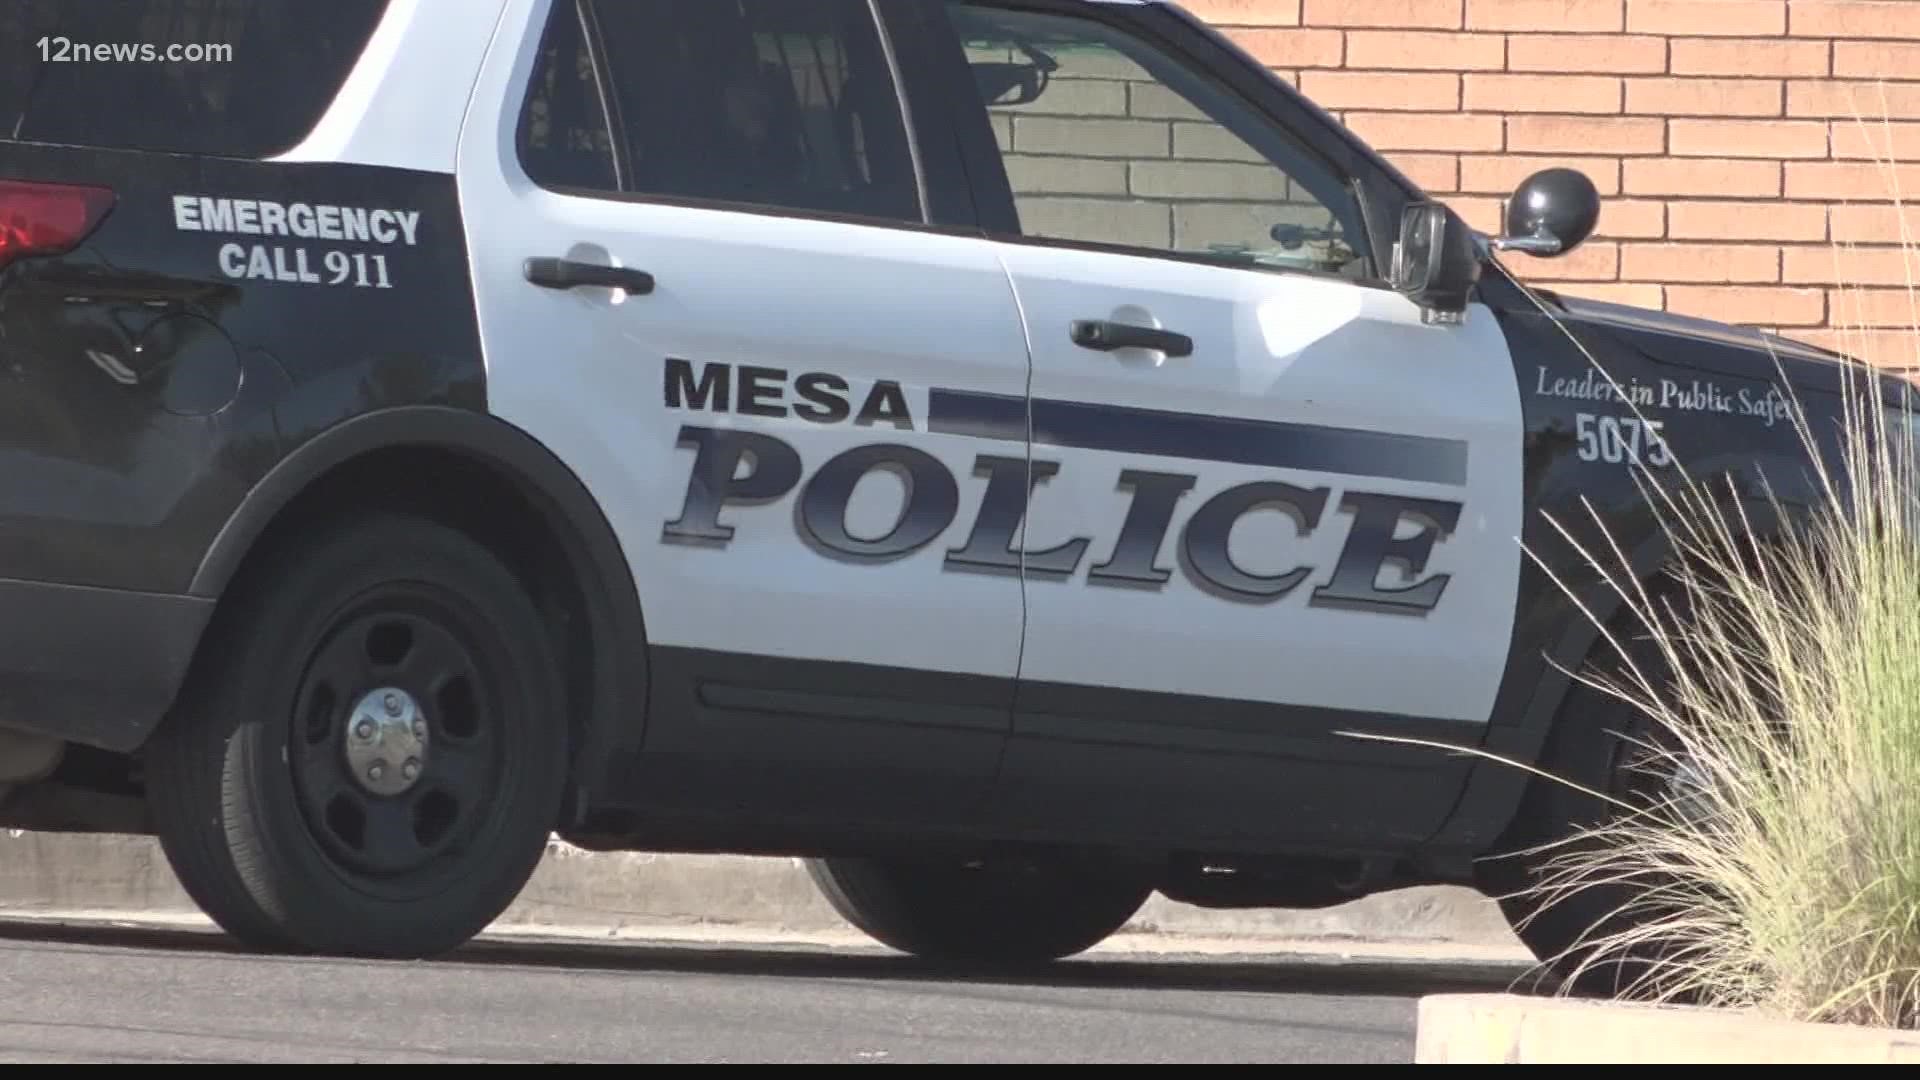 The City of Mesa is finalizing plans for a new multi-million dollar crime center to catch and stop crime in real-time. COVID relief dollars will help fund it.